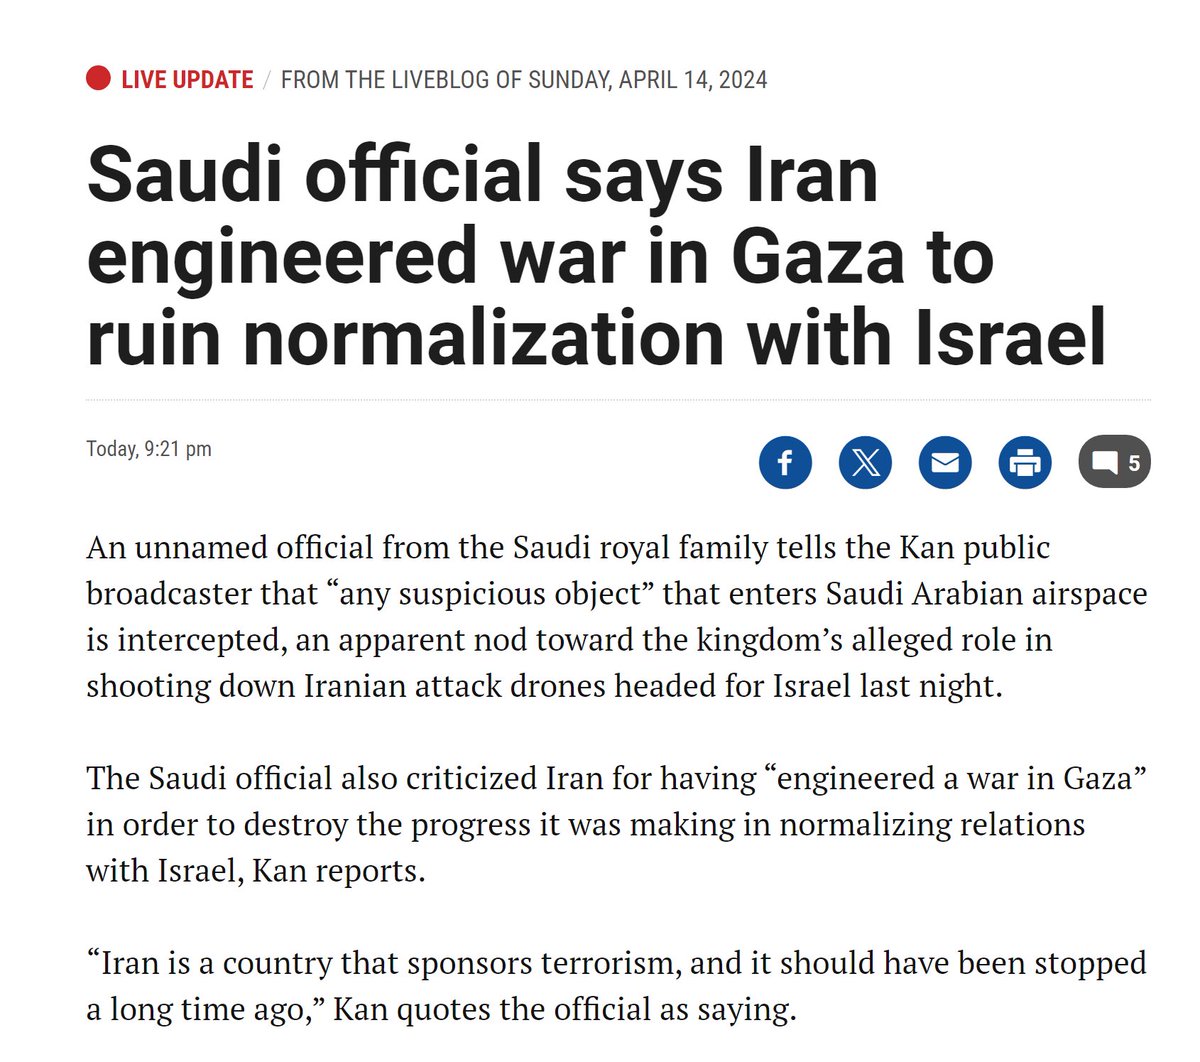 Precisely this. The Arab-Israeli rapprochement was making huge strides before 7 Oct, to Iranian horror. But that alliance came together last night - providing momentum that Israel can now build upon spectator.co.uk/article/israel…